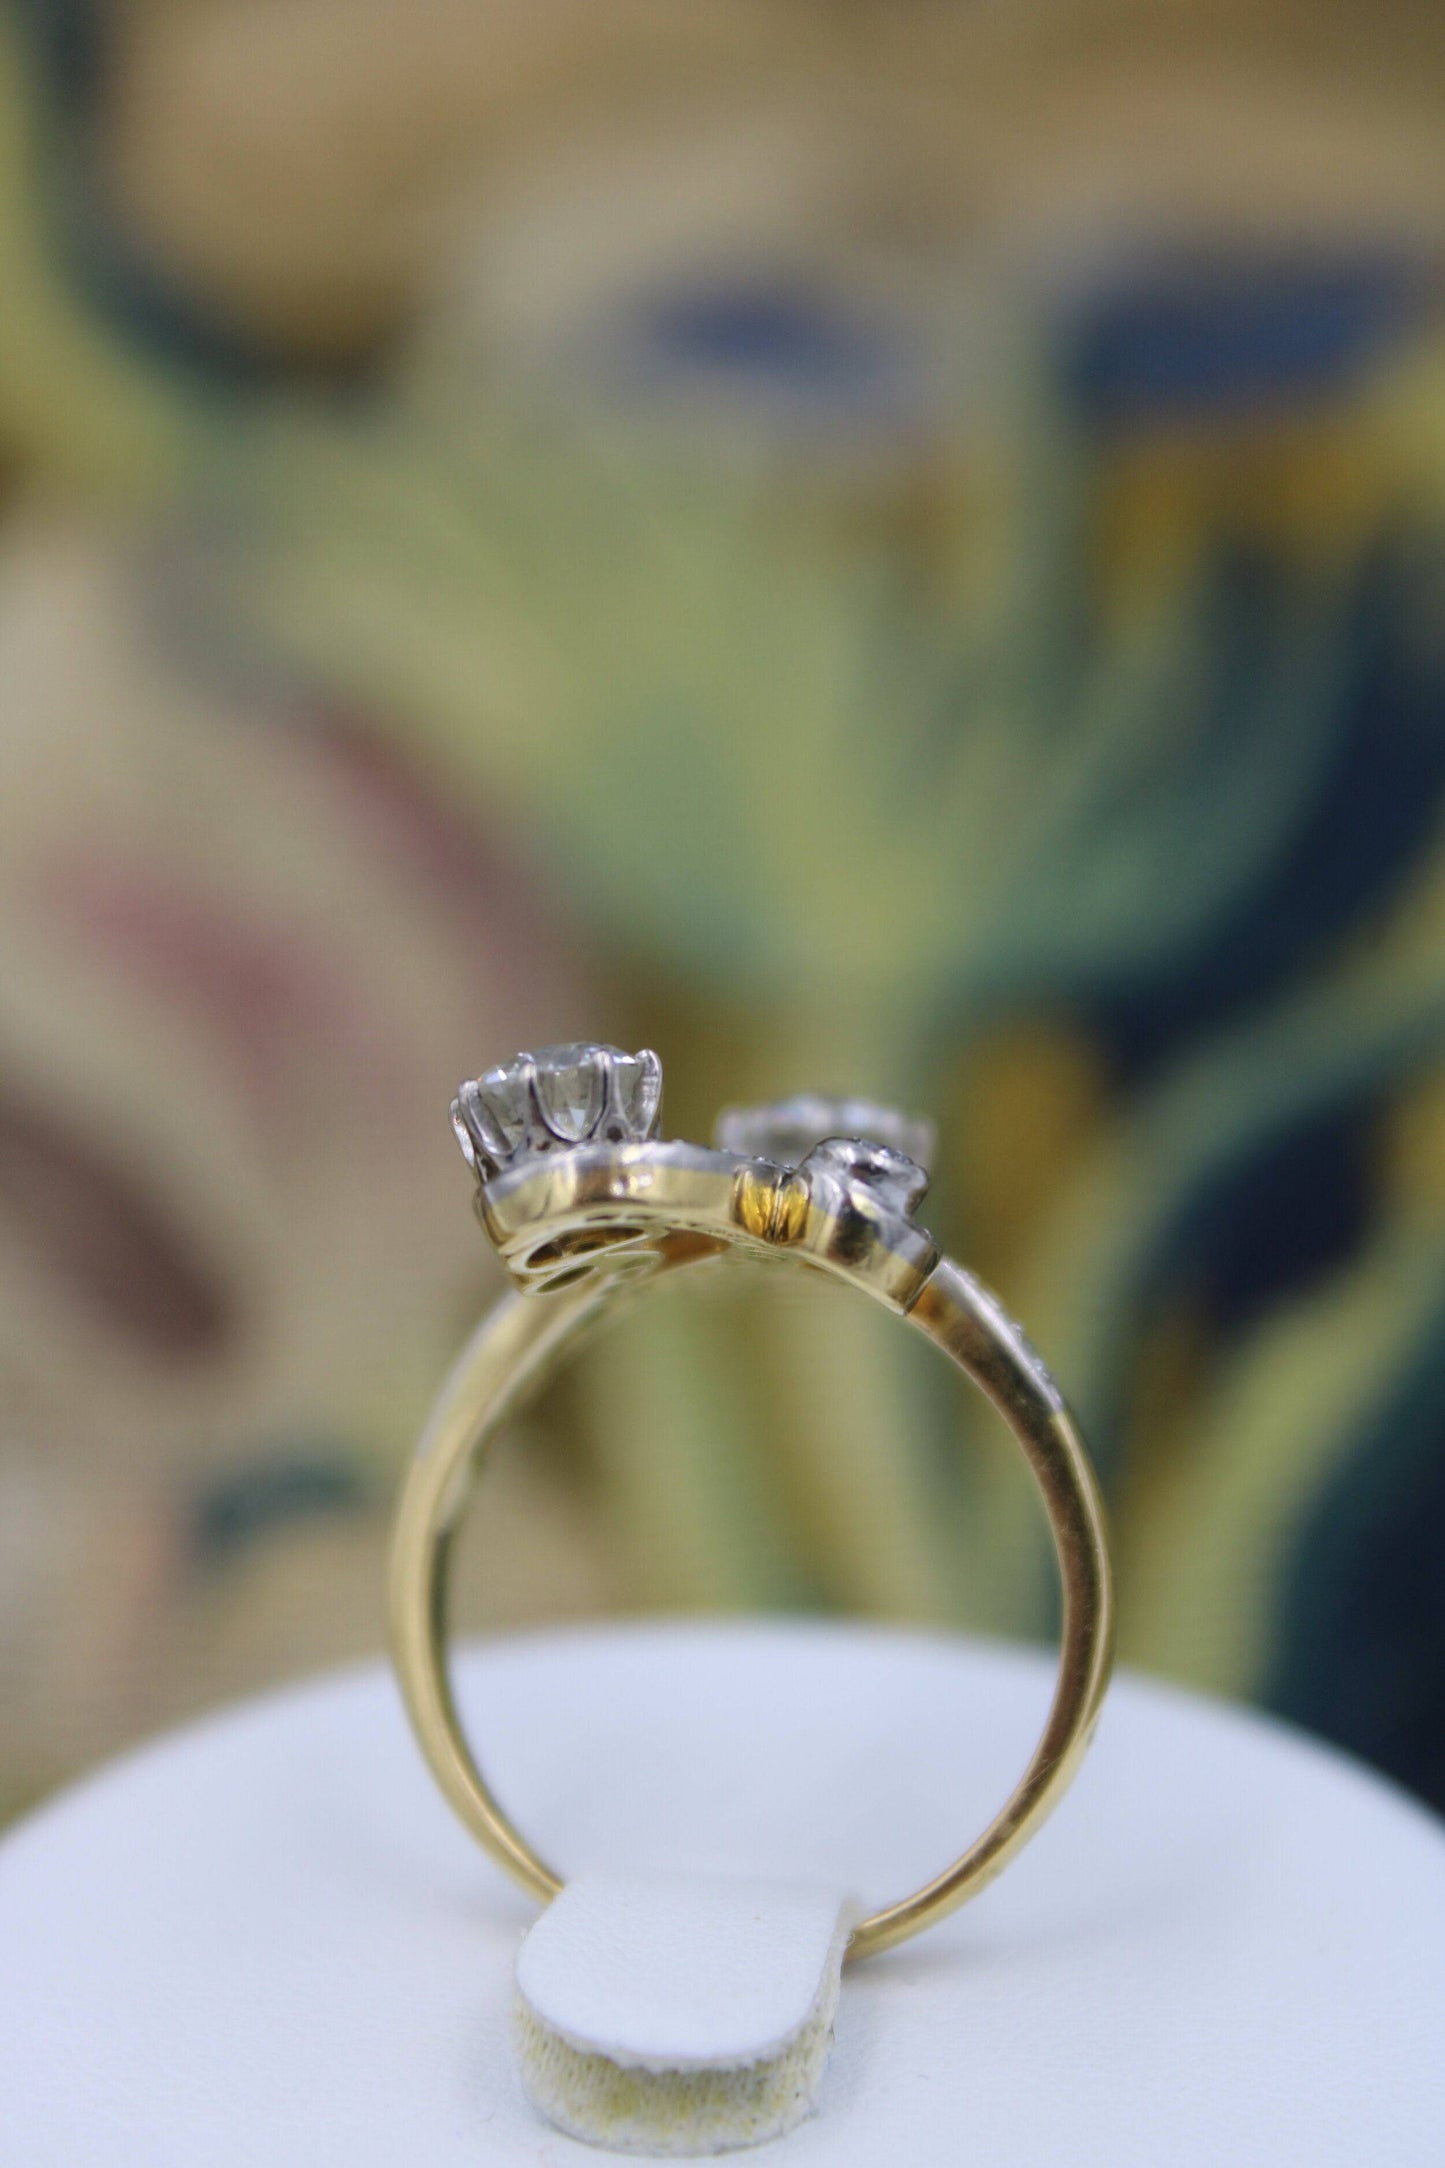 A very fine Belle Epoque Diamond Ring mounted in 18ct Yellow Gold & Platinum, French, Circa 1905 - Robin Haydock Antiques